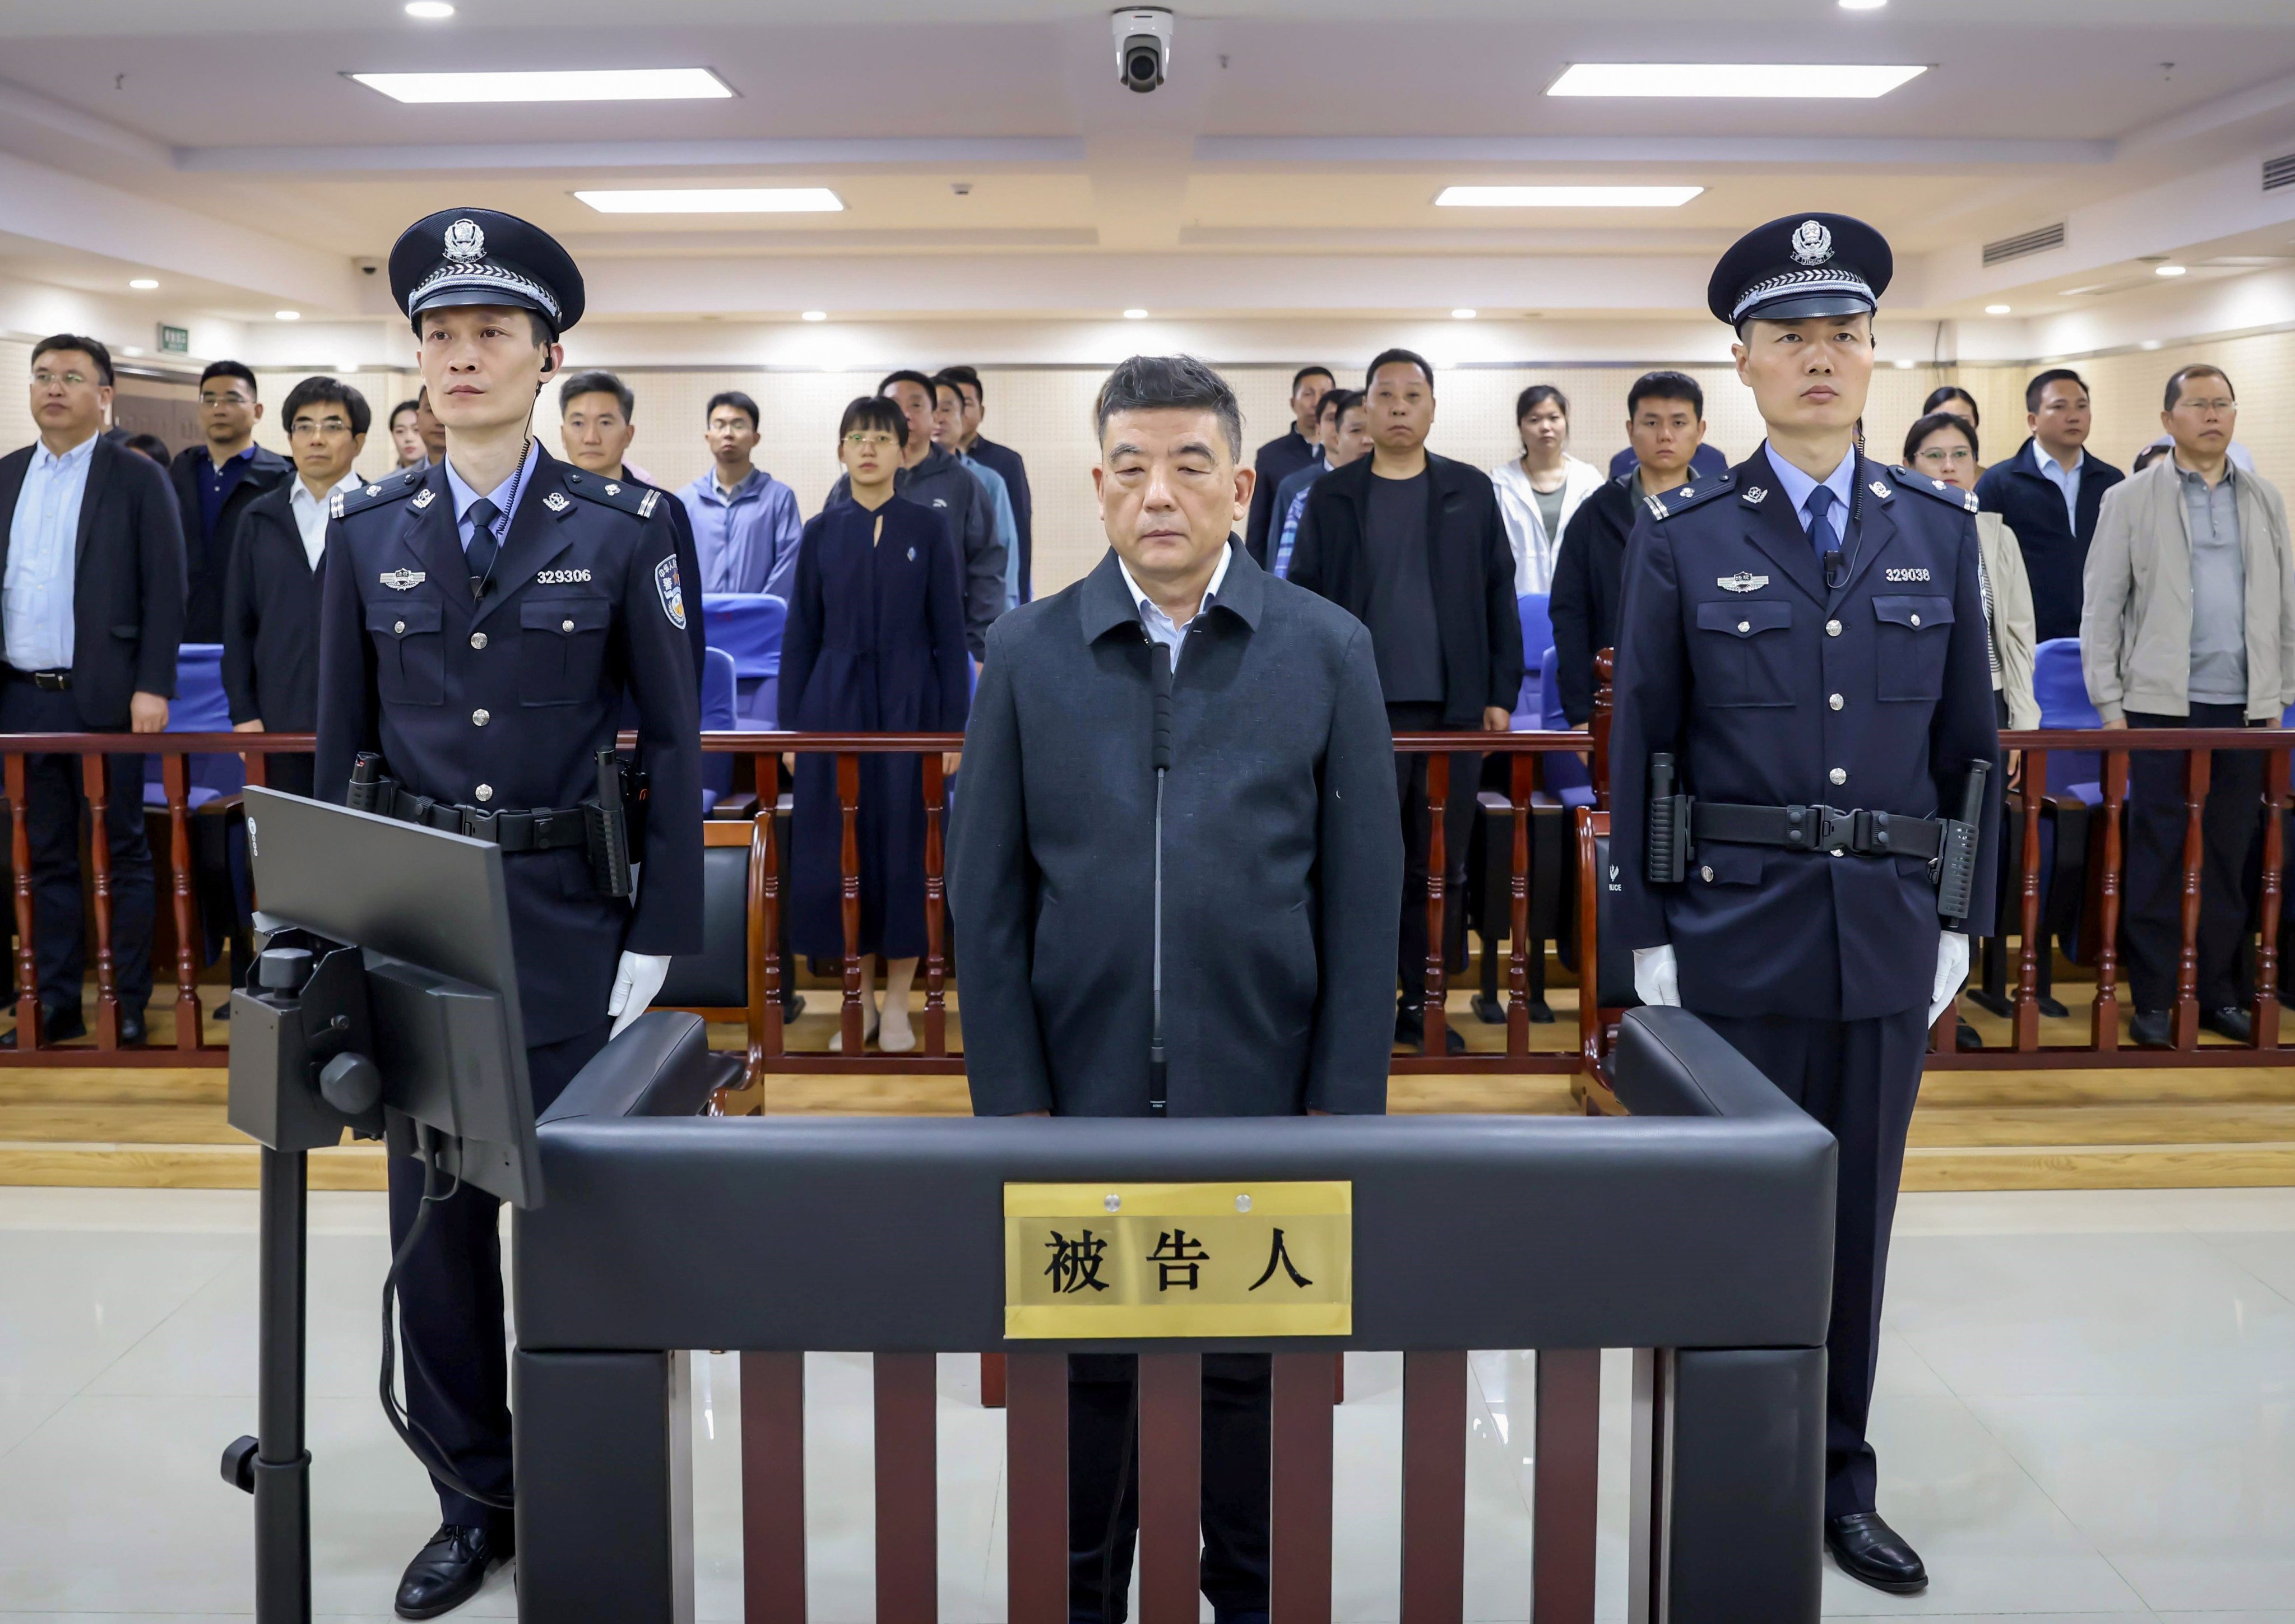 Cao Guangjing, 60, former deputy governor of Hubei province, has been jailed for life for corruption. Photo: CCTV